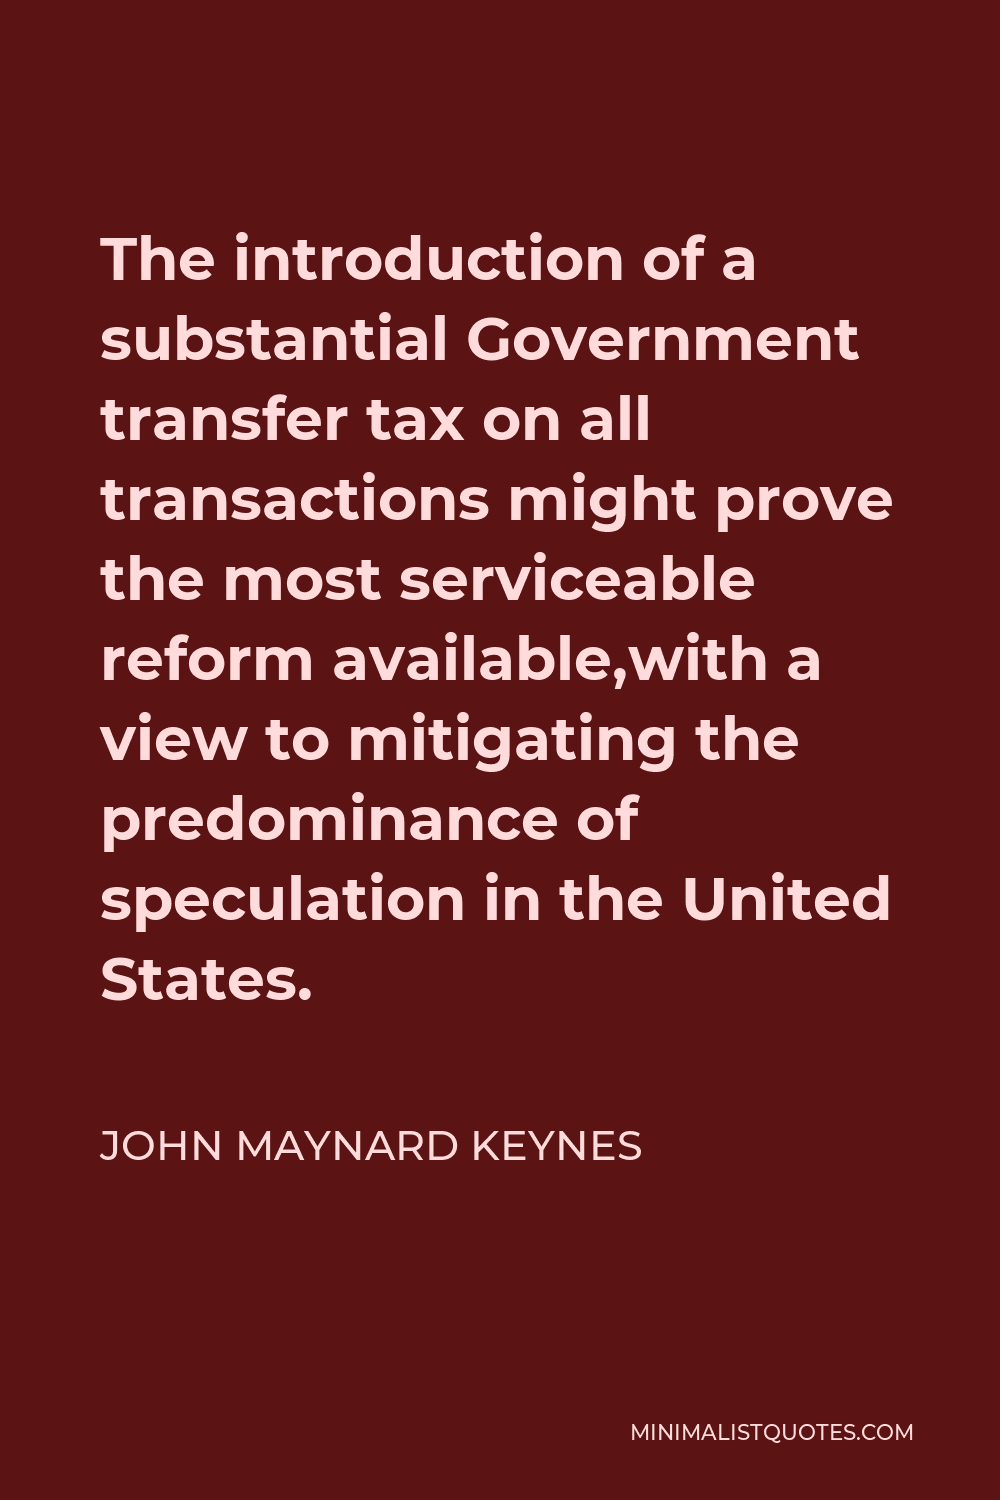 John Maynard Keynes Quote - The introduction of a substantial Government transfer tax on all transactions might prove the most serviceable reform available,with a view to mitigating the predominance of speculation in the United States.